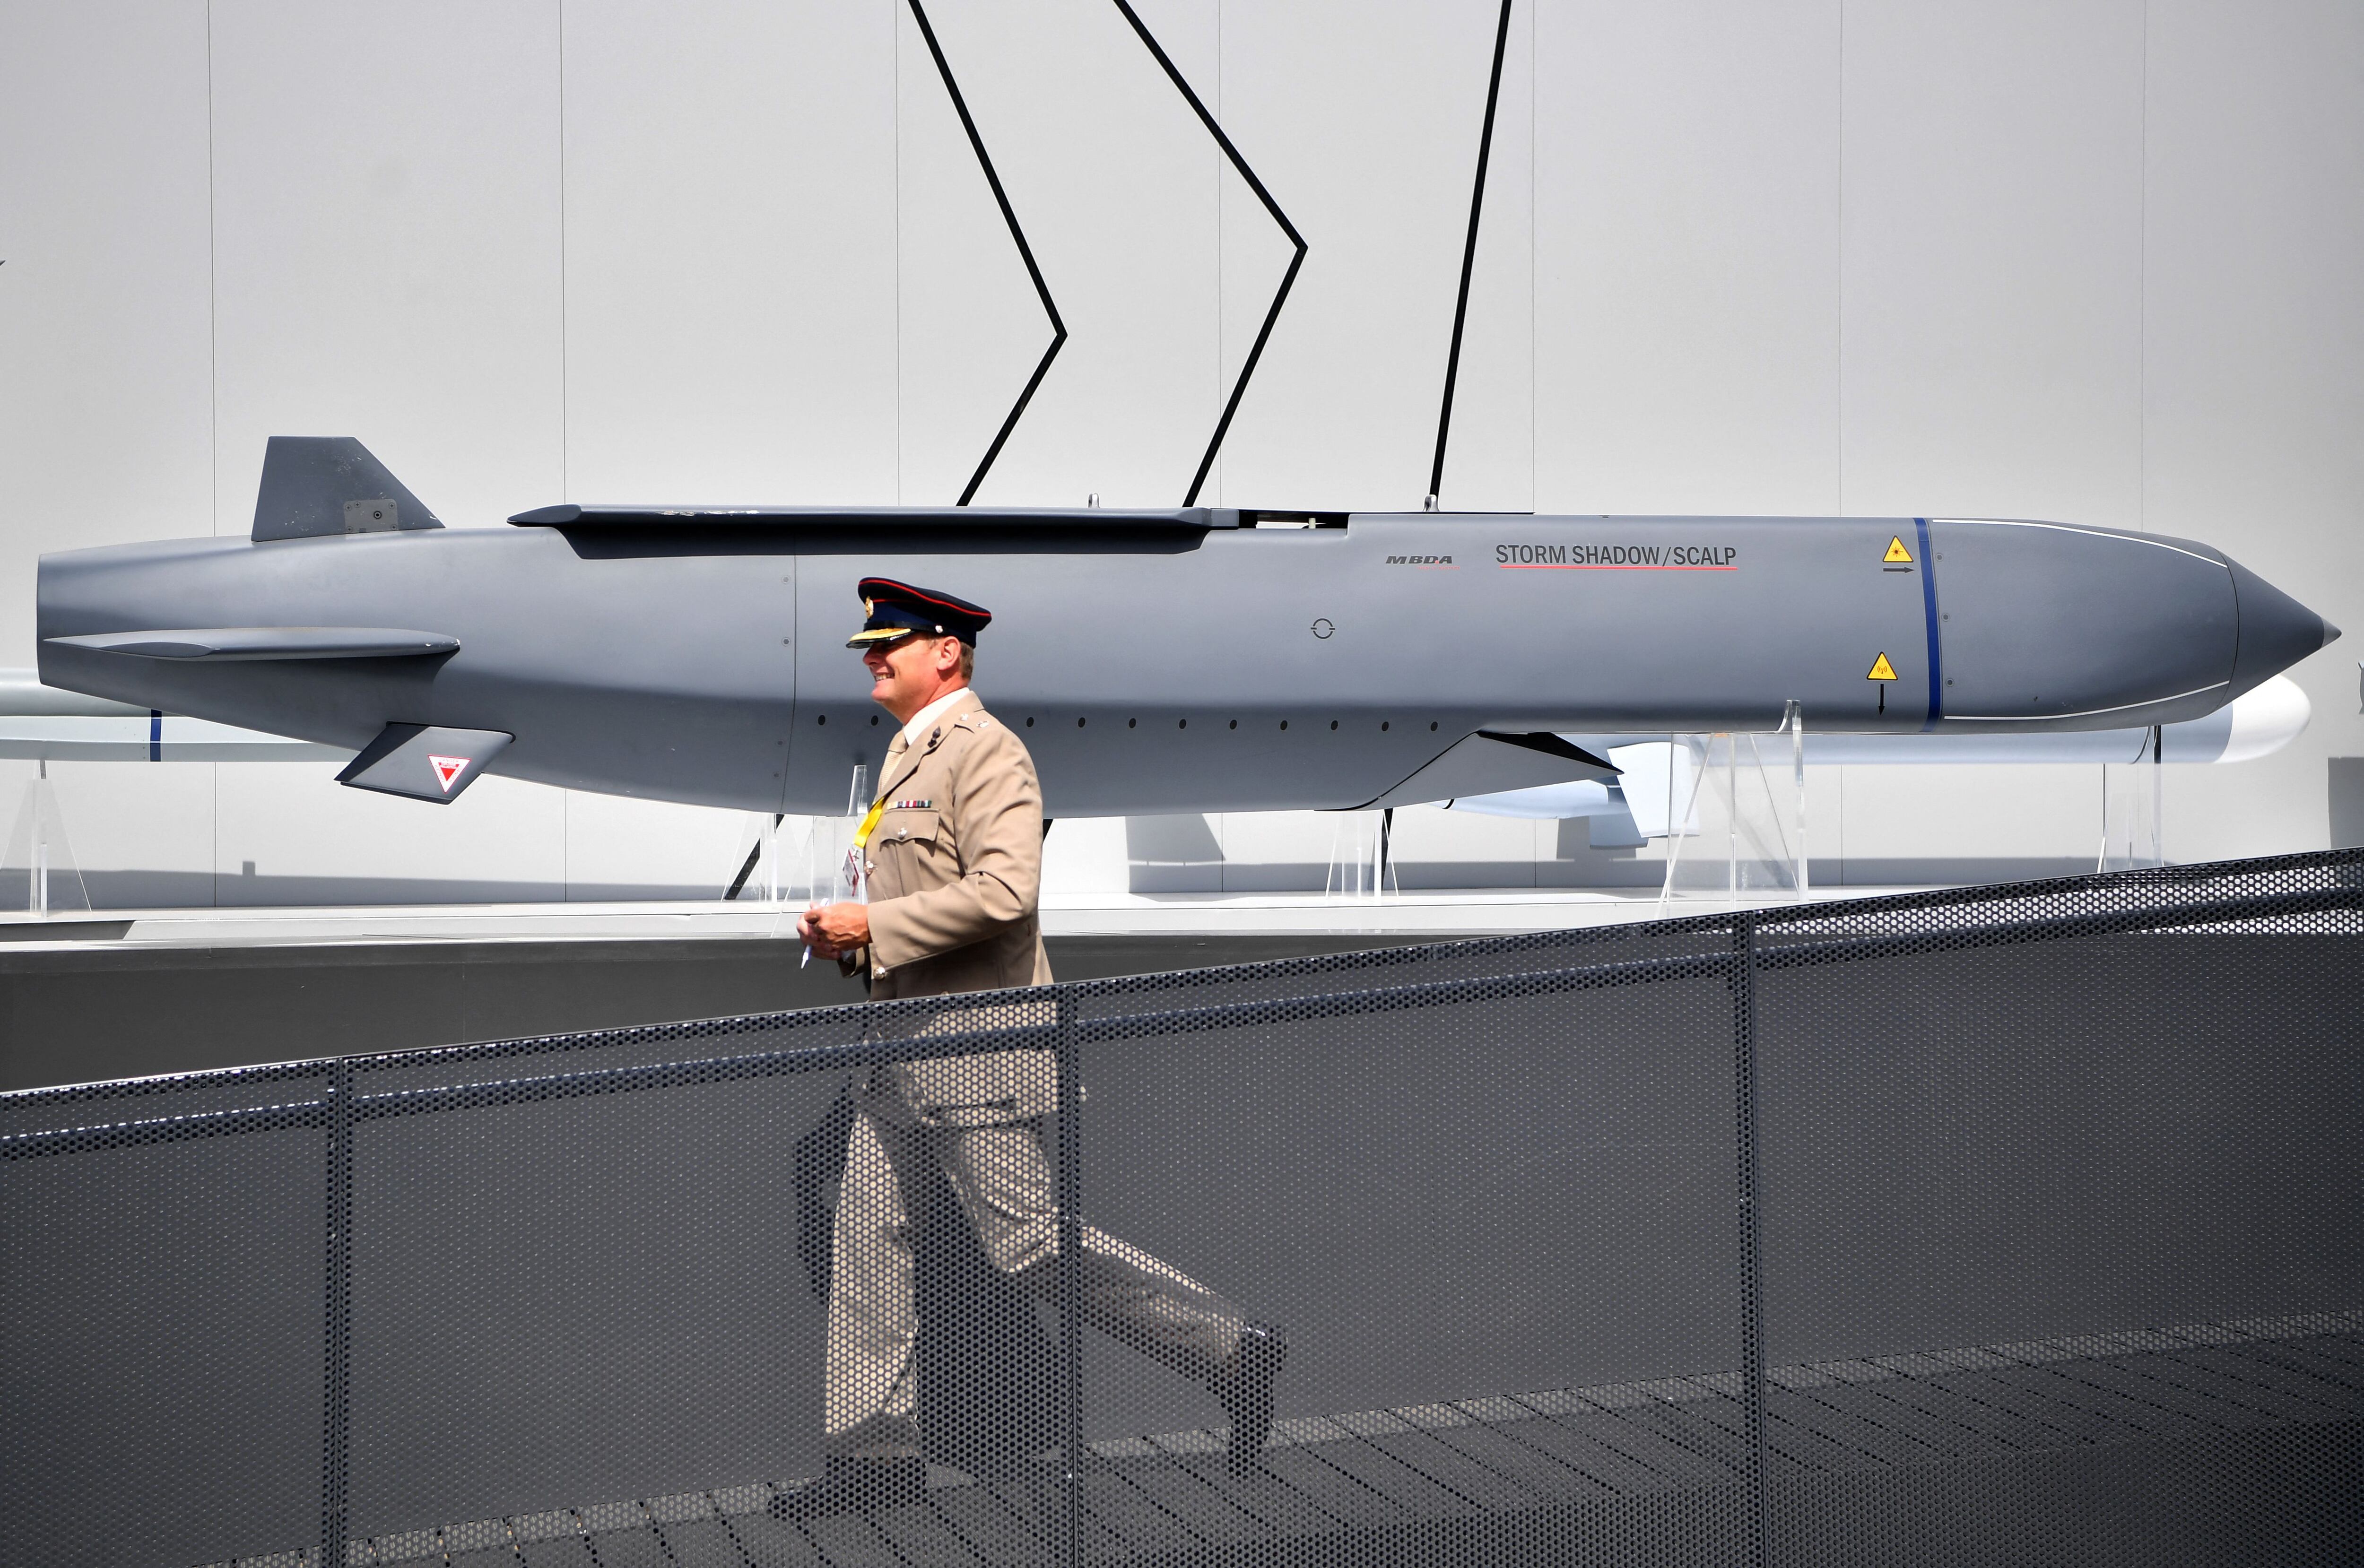 A military man walks past an MBDA Storm Shadow/Scalp missile at the Farnborough Airshow, southwest London, United Kingdom, on July 17, 2018. (Photo by BEN STANSALL/AFP).